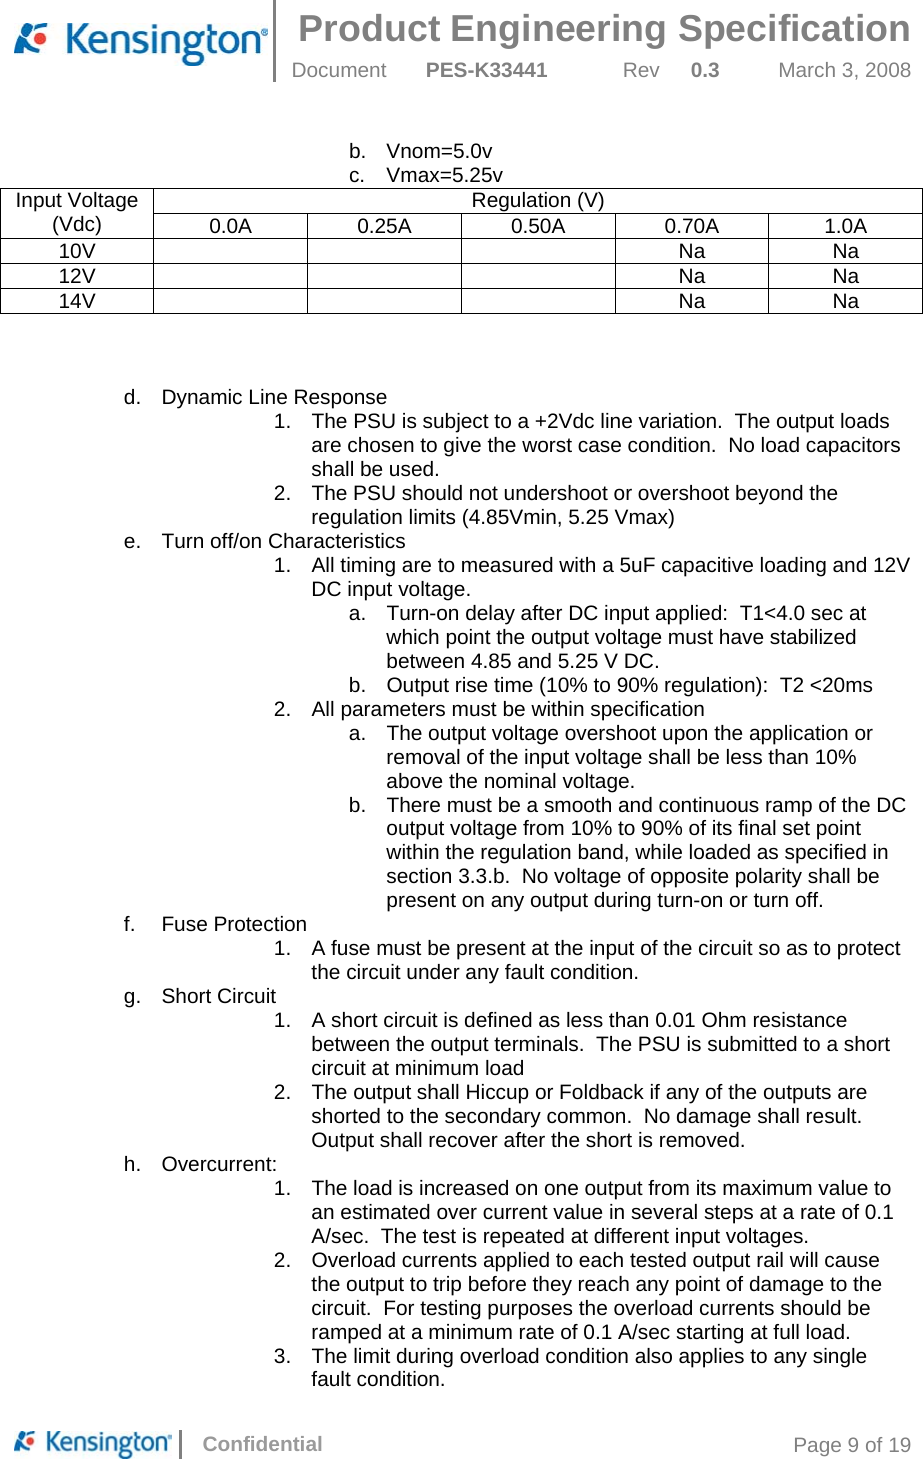  Product Engineering Specification Document  PES-K33441  Rev  0.3  March 3, 2008      Confidential  Page 9 of 19 b. Vnom=5.0v c. Vmax=5.25v Input Voltage (Vdc)  Regulation (V) 0.0A  0.25A 0.50A 0.70A  1.0A 10V    Na Na 12V    Na Na 14V    Na Na    d.  Dynamic Line Response 1.  The PSU is subject to a +2Vdc line variation.  The output loads are chosen to give the worst case condition.  No load capacitors shall be used. 2.  The PSU should not undershoot or overshoot beyond the regulation limits (4.85Vmin, 5.25 Vmax) e.  Turn off/on Characteristics 1.  All timing are to measured with a 5uF capacitive loading and 12V DC input voltage. a.  Turn-on delay after DC input applied:  T1&lt;4.0 sec at which point the output voltage must have stabilized between 4.85 and 5.25 V DC. b.  Output rise time (10% to 90% regulation):  T2 &lt;20ms 2.  All parameters must be within specification a.  The output voltage overshoot upon the application or removal of the input voltage shall be less than 10% above the nominal voltage. b.  There must be a smooth and continuous ramp of the DC output voltage from 10% to 90% of its final set point within the regulation band, while loaded as specified in section 3.3.b.  No voltage of opposite polarity shall be present on any output during turn-on or turn off. f. Fuse Protection 1.  A fuse must be present at the input of the circuit so as to protect the circuit under any fault condition. g. Short Circuit 1.  A short circuit is defined as less than 0.01 Ohm resistance between the output terminals.  The PSU is submitted to a short circuit at minimum load 2.  The output shall Hiccup or Foldback if any of the outputs are shorted to the secondary common.  No damage shall result.  Output shall recover after the short is removed. h. Overcurrent: 1.  The load is increased on one output from its maximum value to an estimated over current value in several steps at a rate of 0.1 A/sec.  The test is repeated at different input voltages. 2.  Overload currents applied to each tested output rail will cause the output to trip before they reach any point of damage to the circuit.  For testing purposes the overload currents should be ramped at a minimum rate of 0.1 A/sec starting at full load. 3.  The limit during overload condition also applies to any single fault condition. 